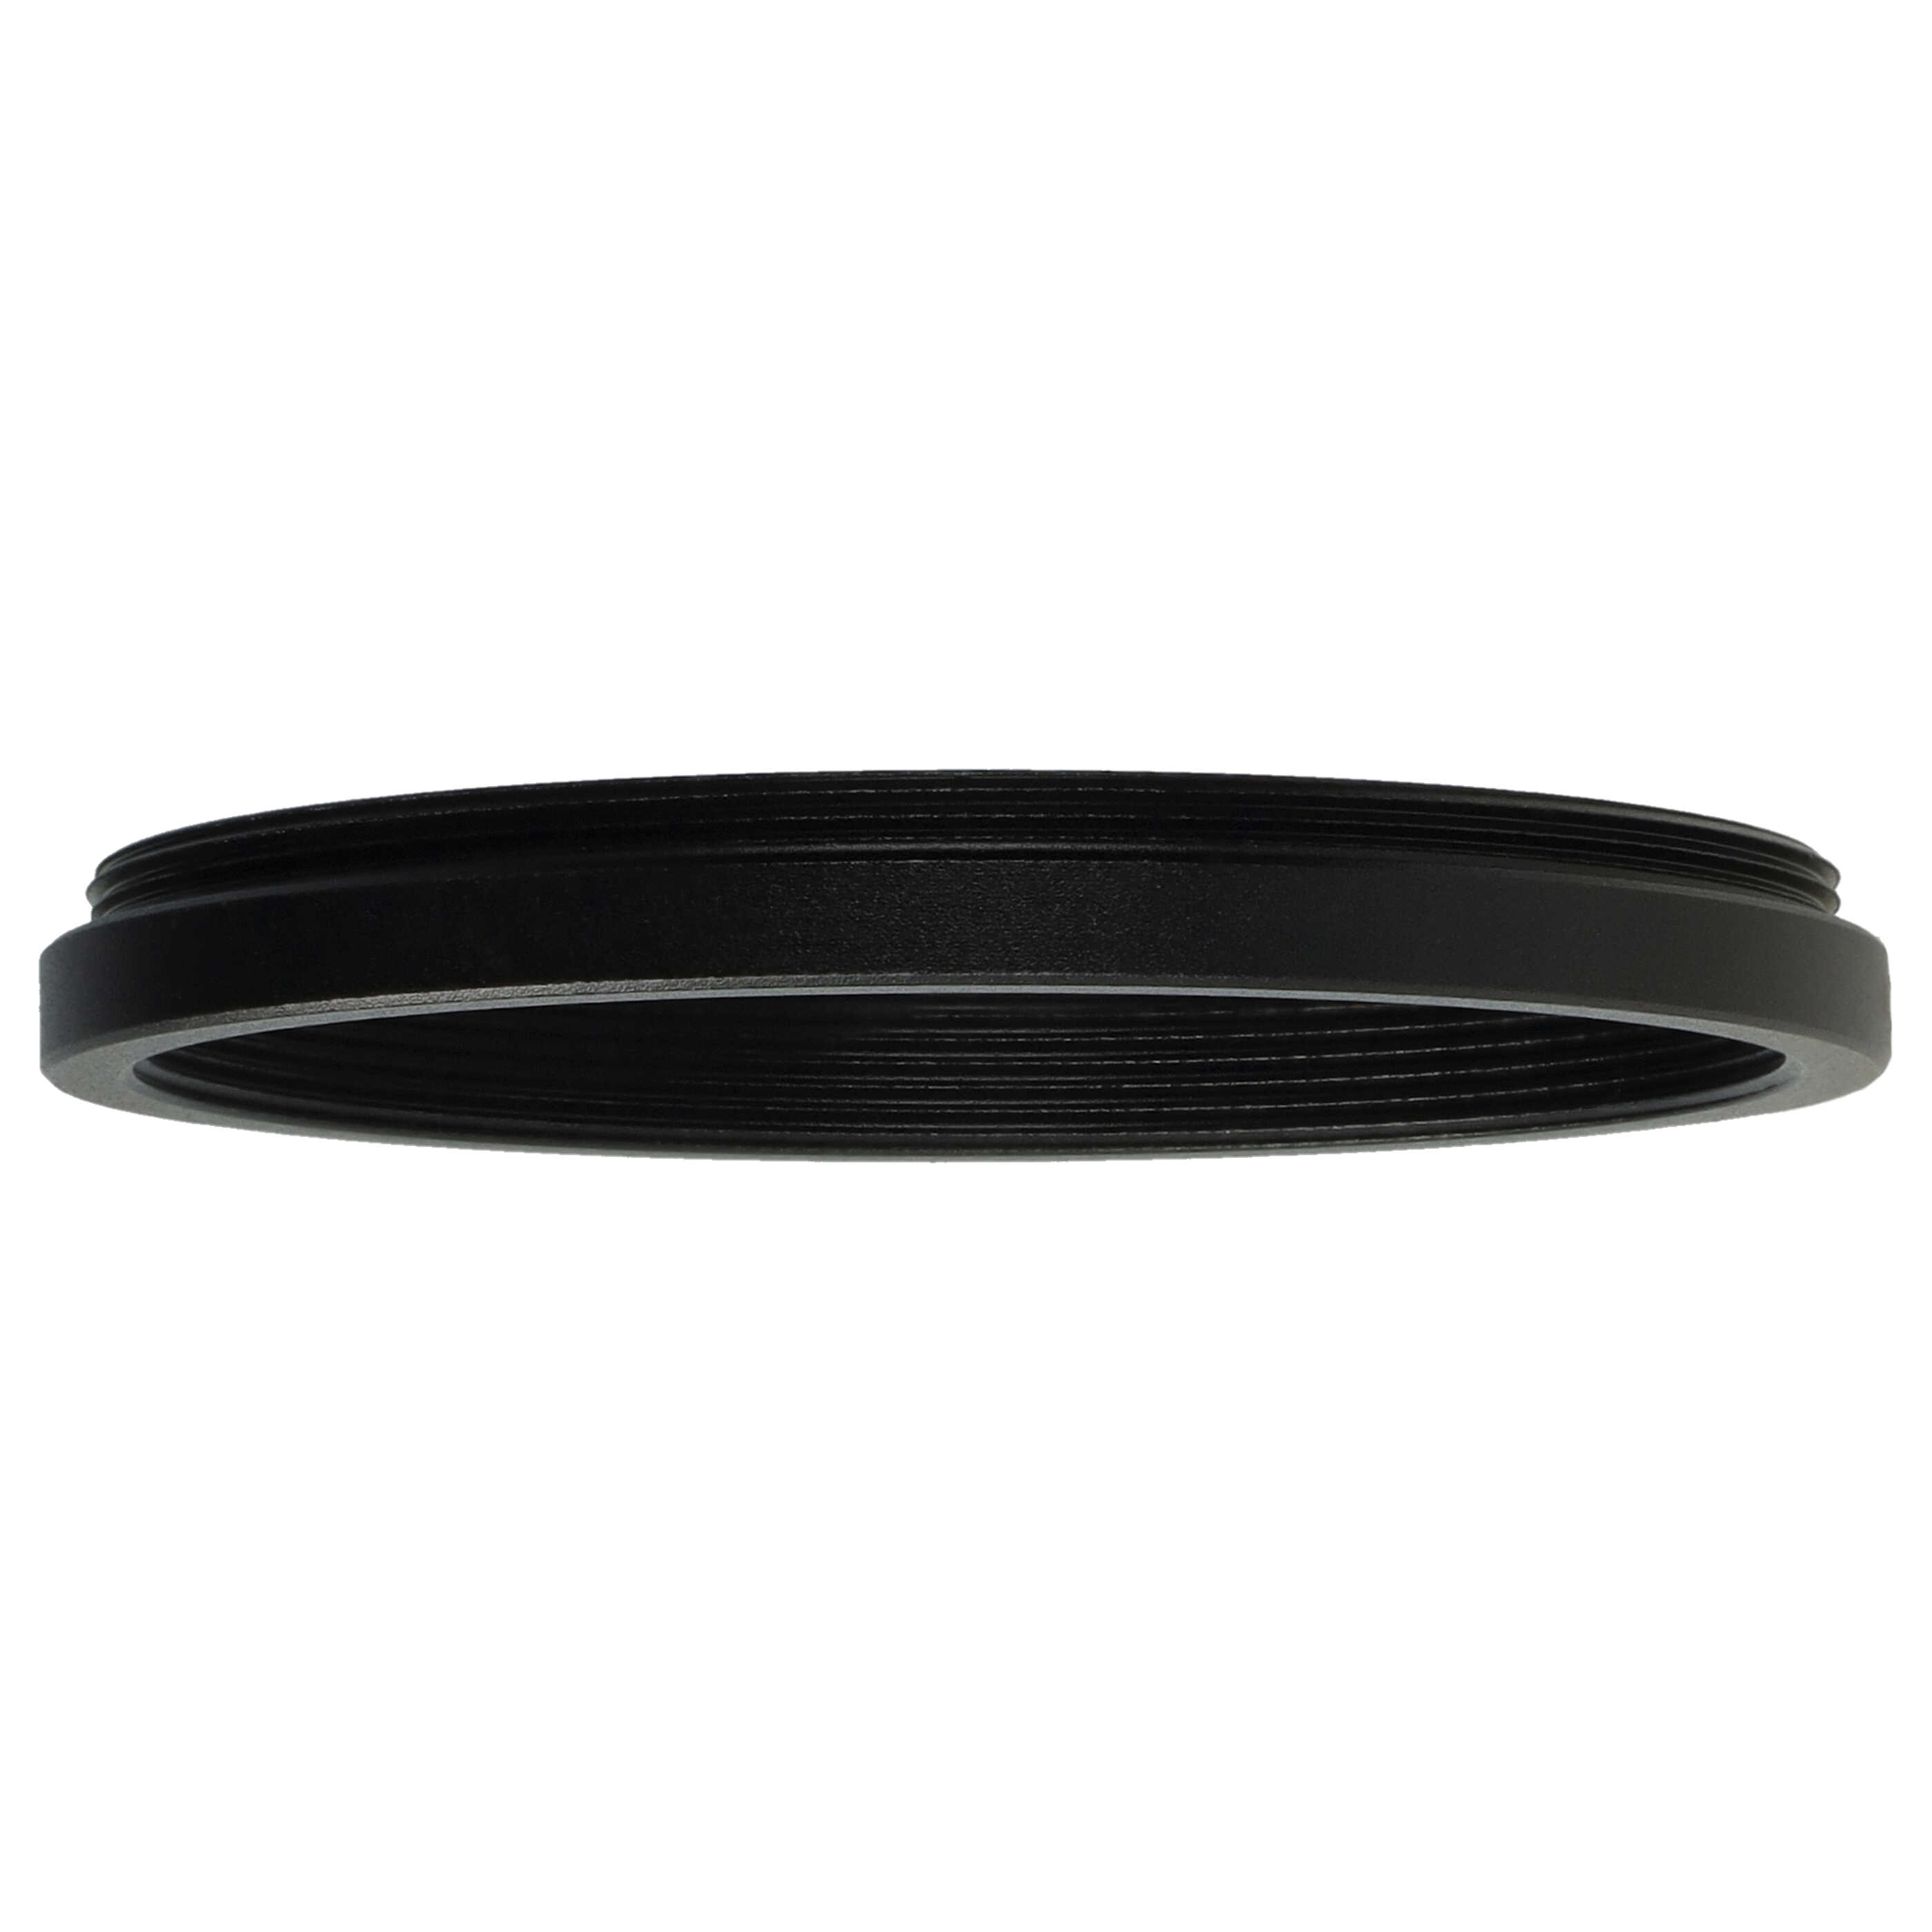 Step-Down Ring Adapter from 52 mm to 49 mm suitable for Camera Lens - Filter Adapter, metal